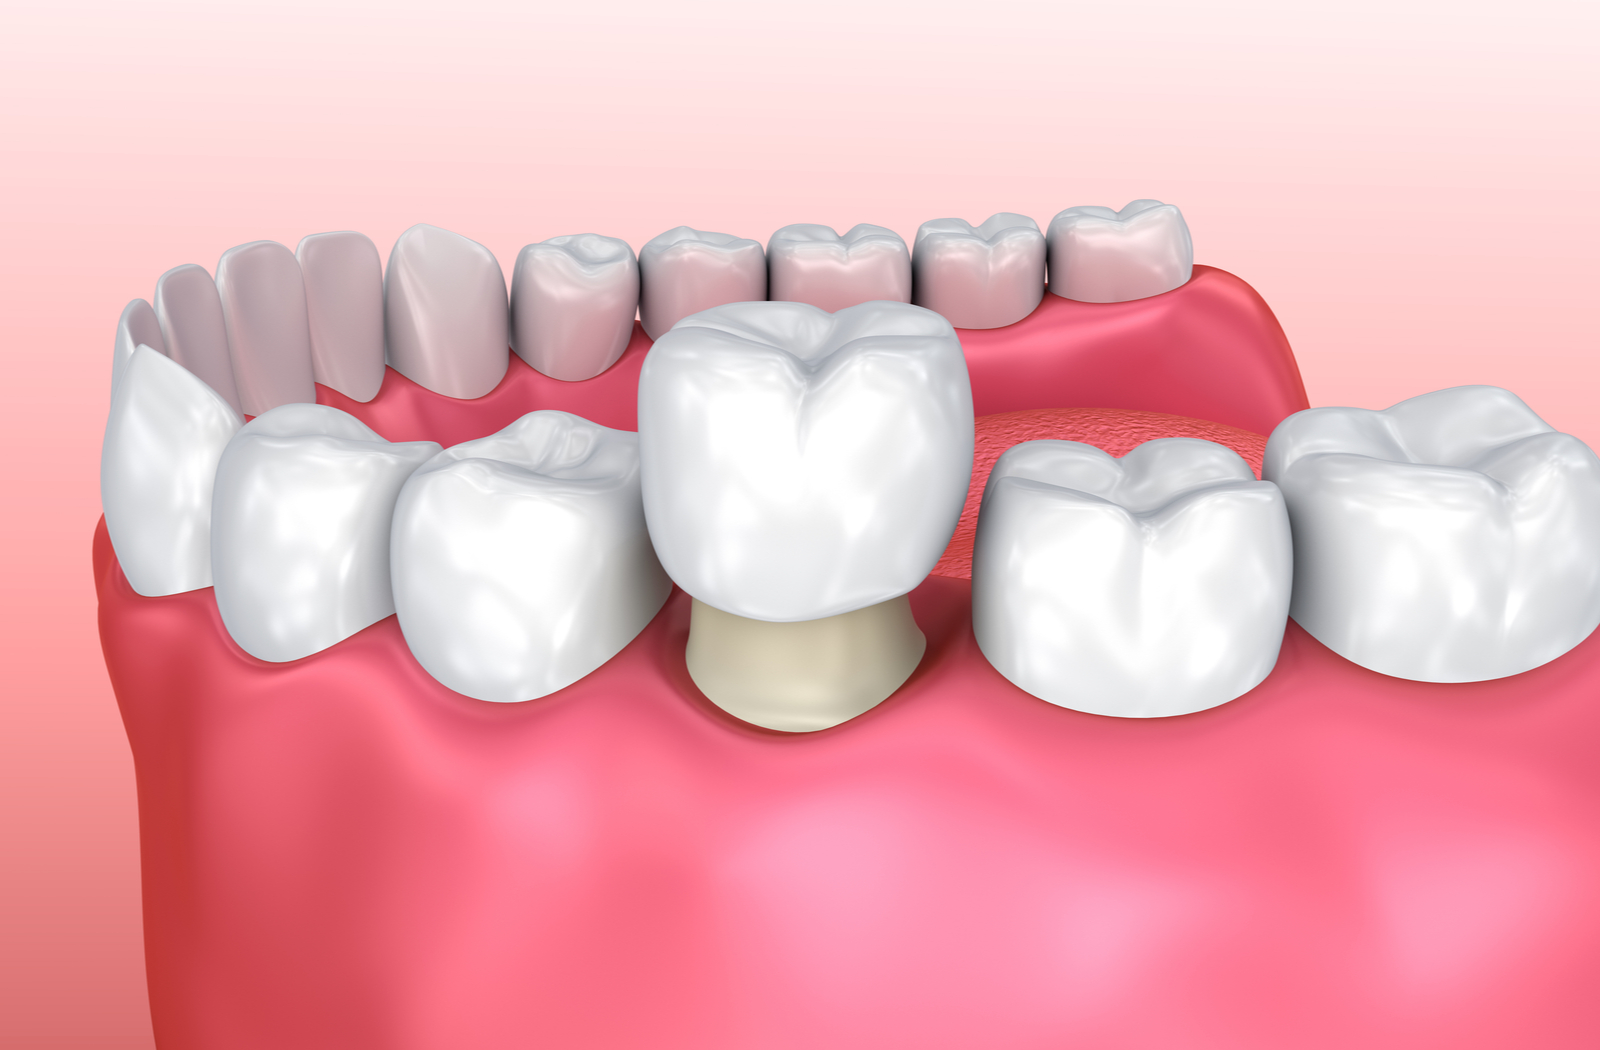 Affordable Dentures Near Me: How To Find The Best Deals